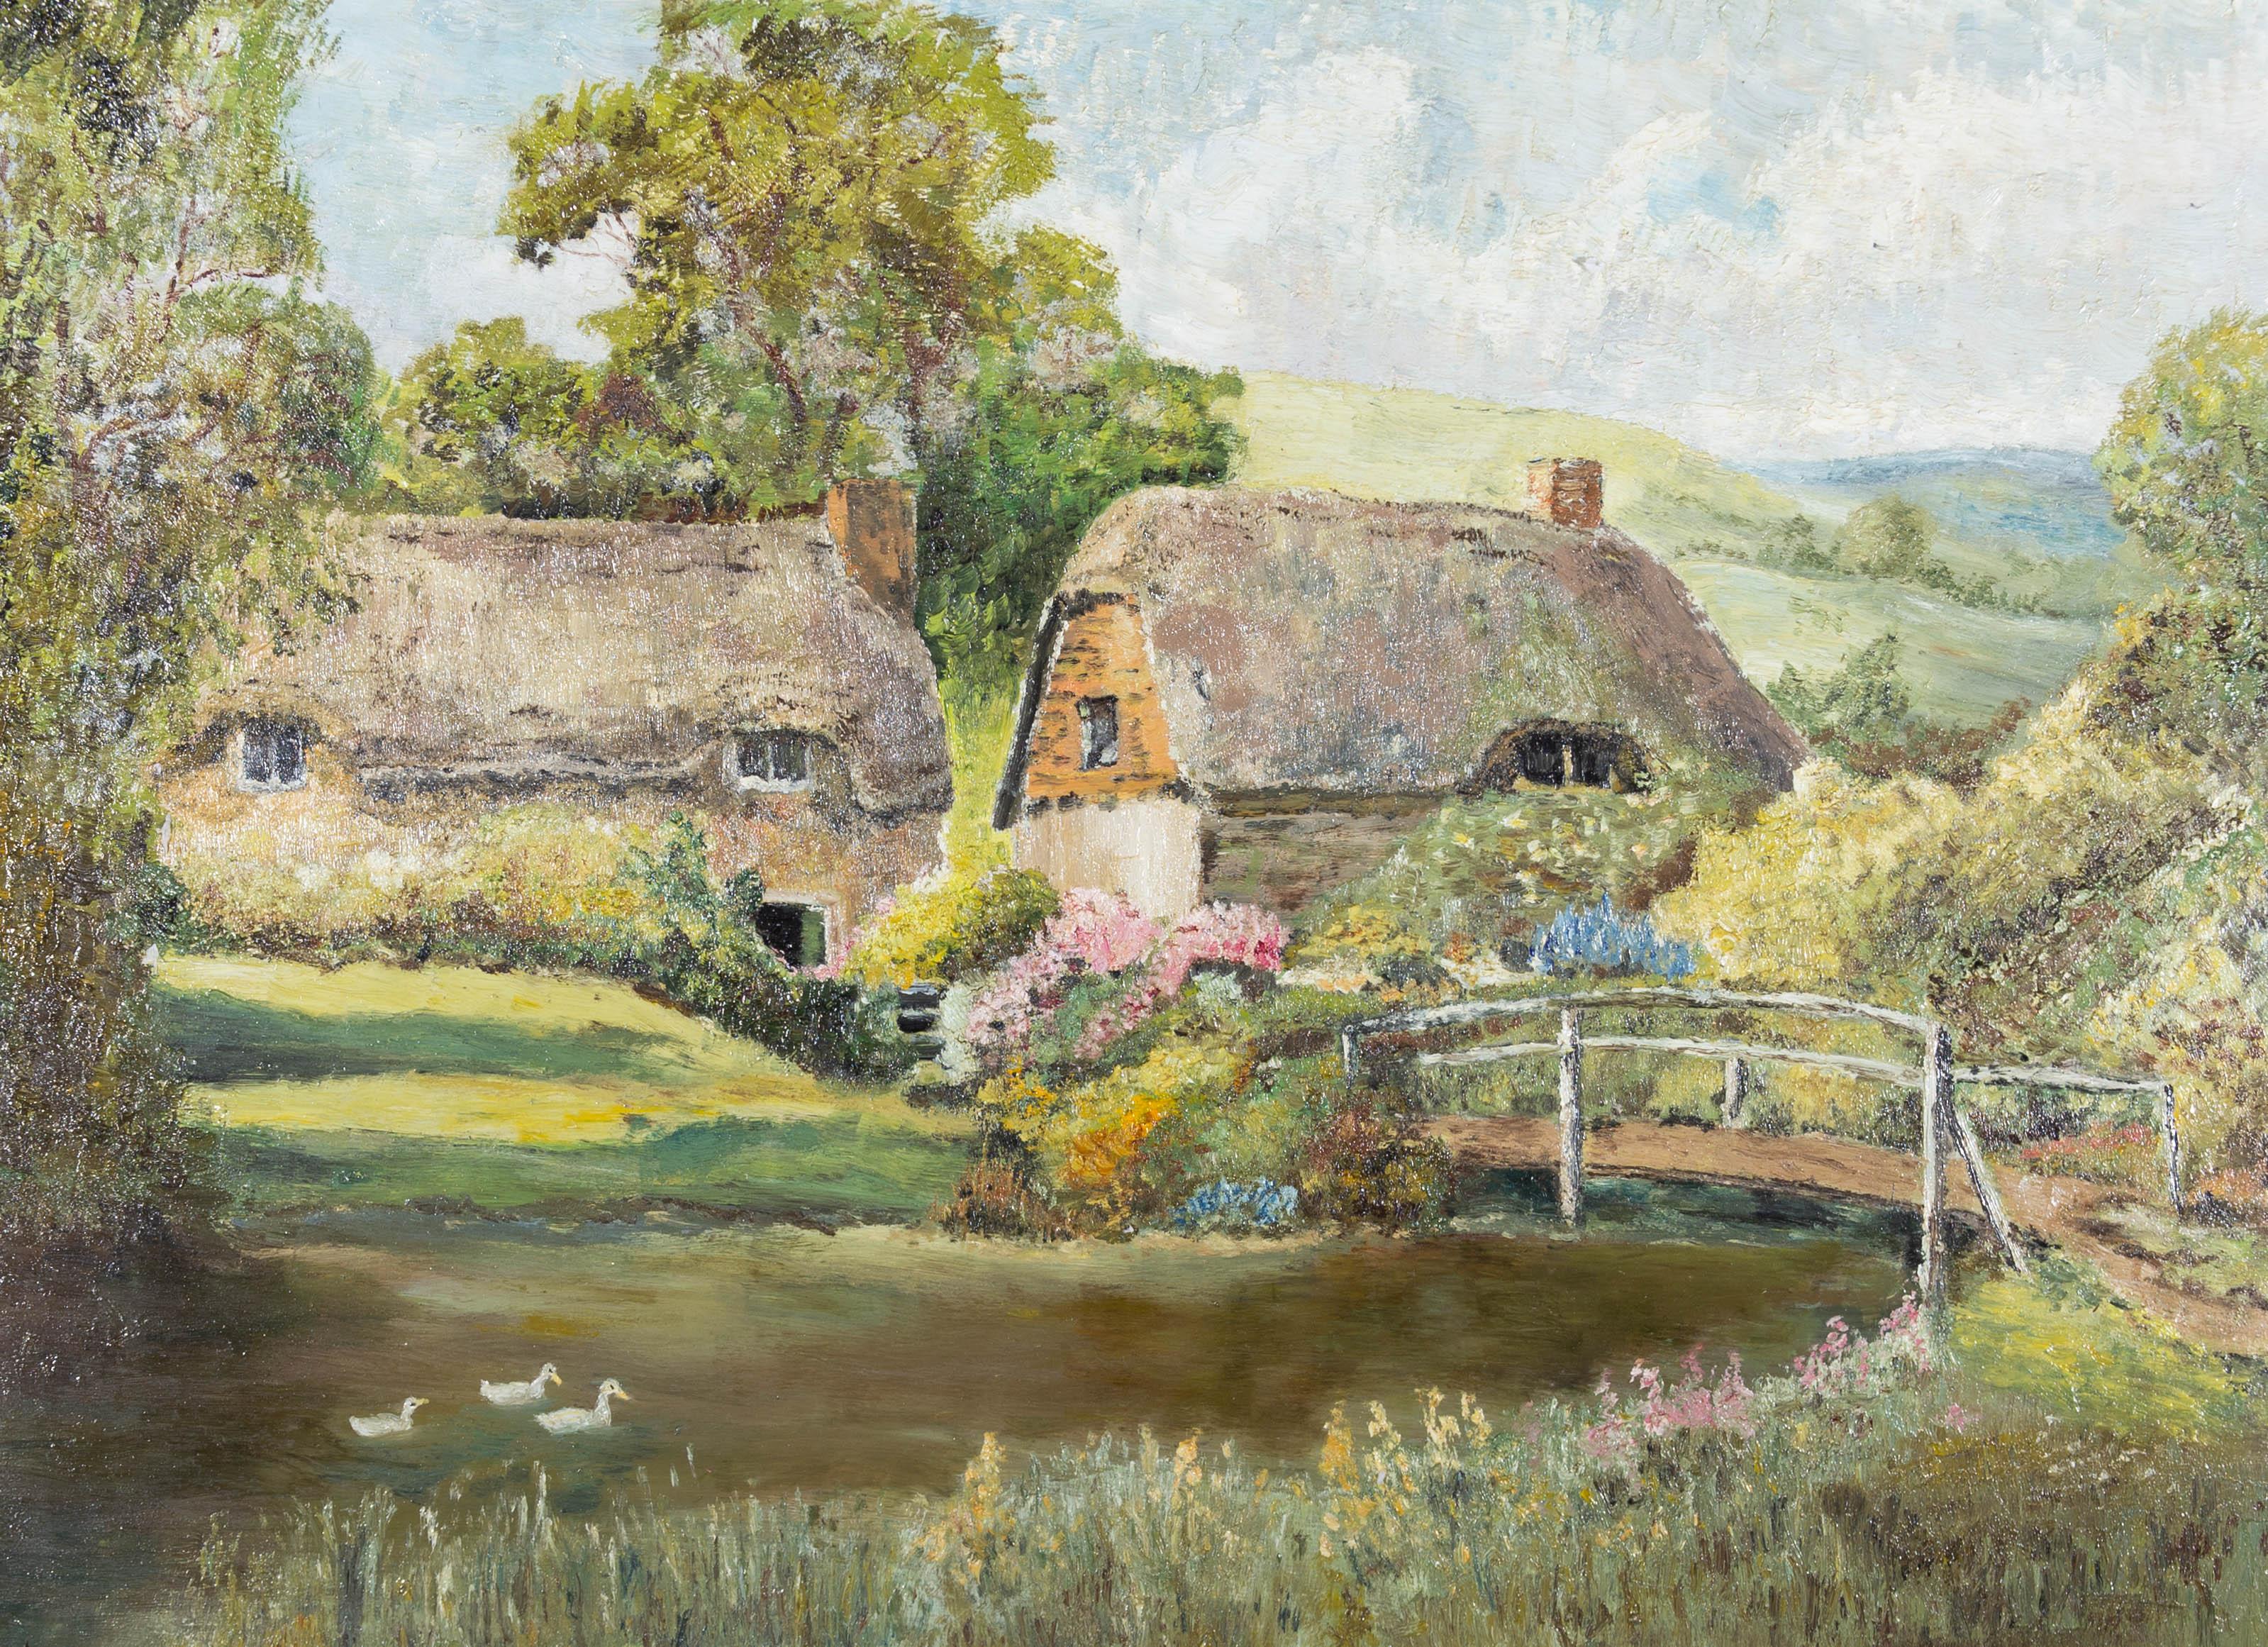 A delightful country scene with two thatched cottages sitting on the edge of a pond. Summer flowers bloom in the quaint country a gardens and ducks float on the calm water. Unsigned. Presented in a painted cream wood frame. On board.
